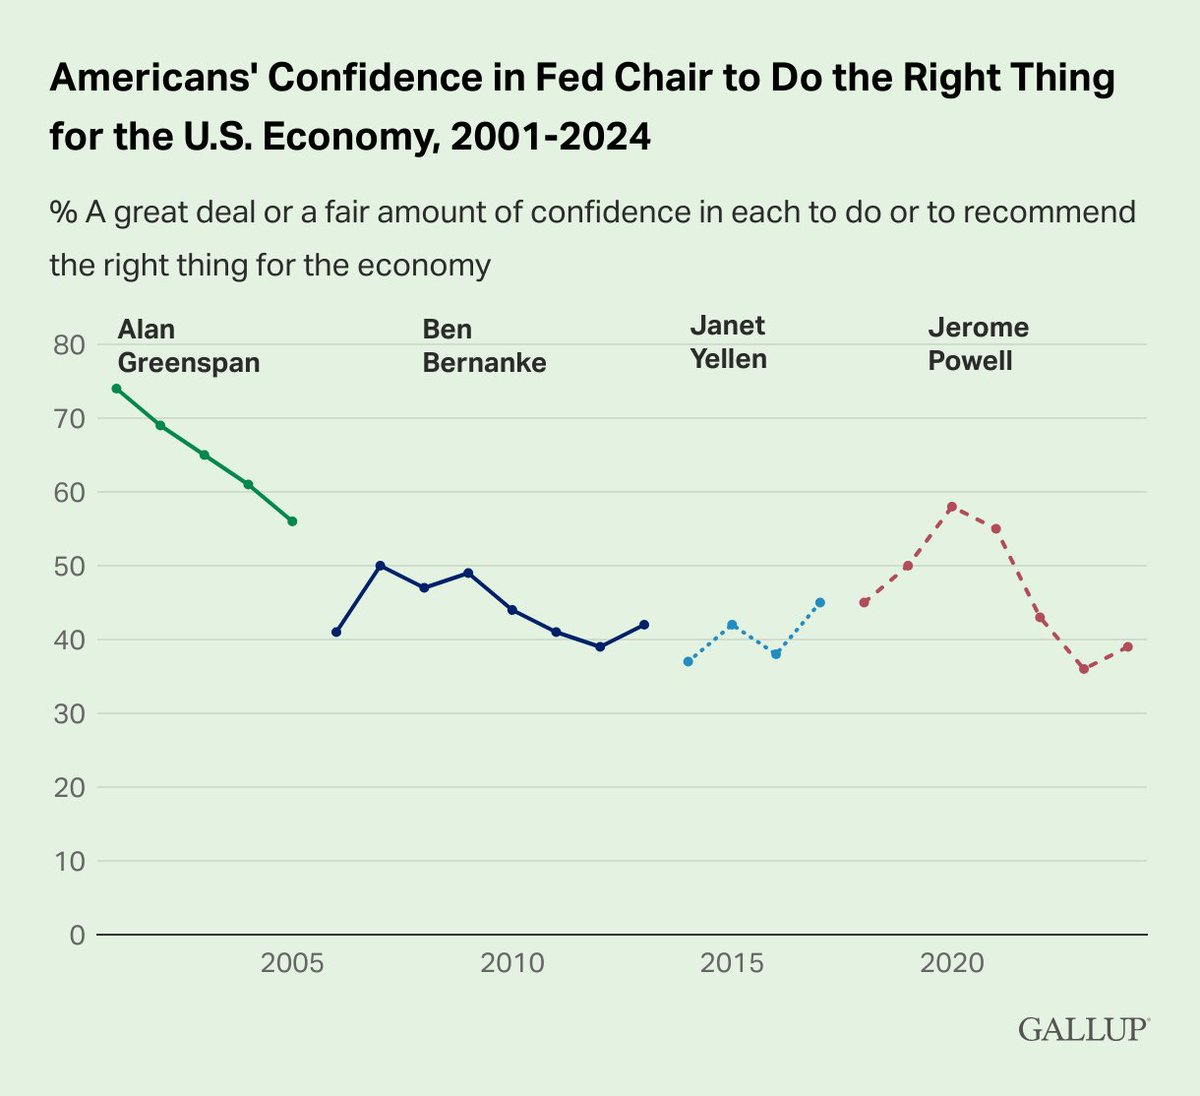 Confidence in Fed chair Jerome Powell remains low. Full story: on.gallup.com/4a3eM05